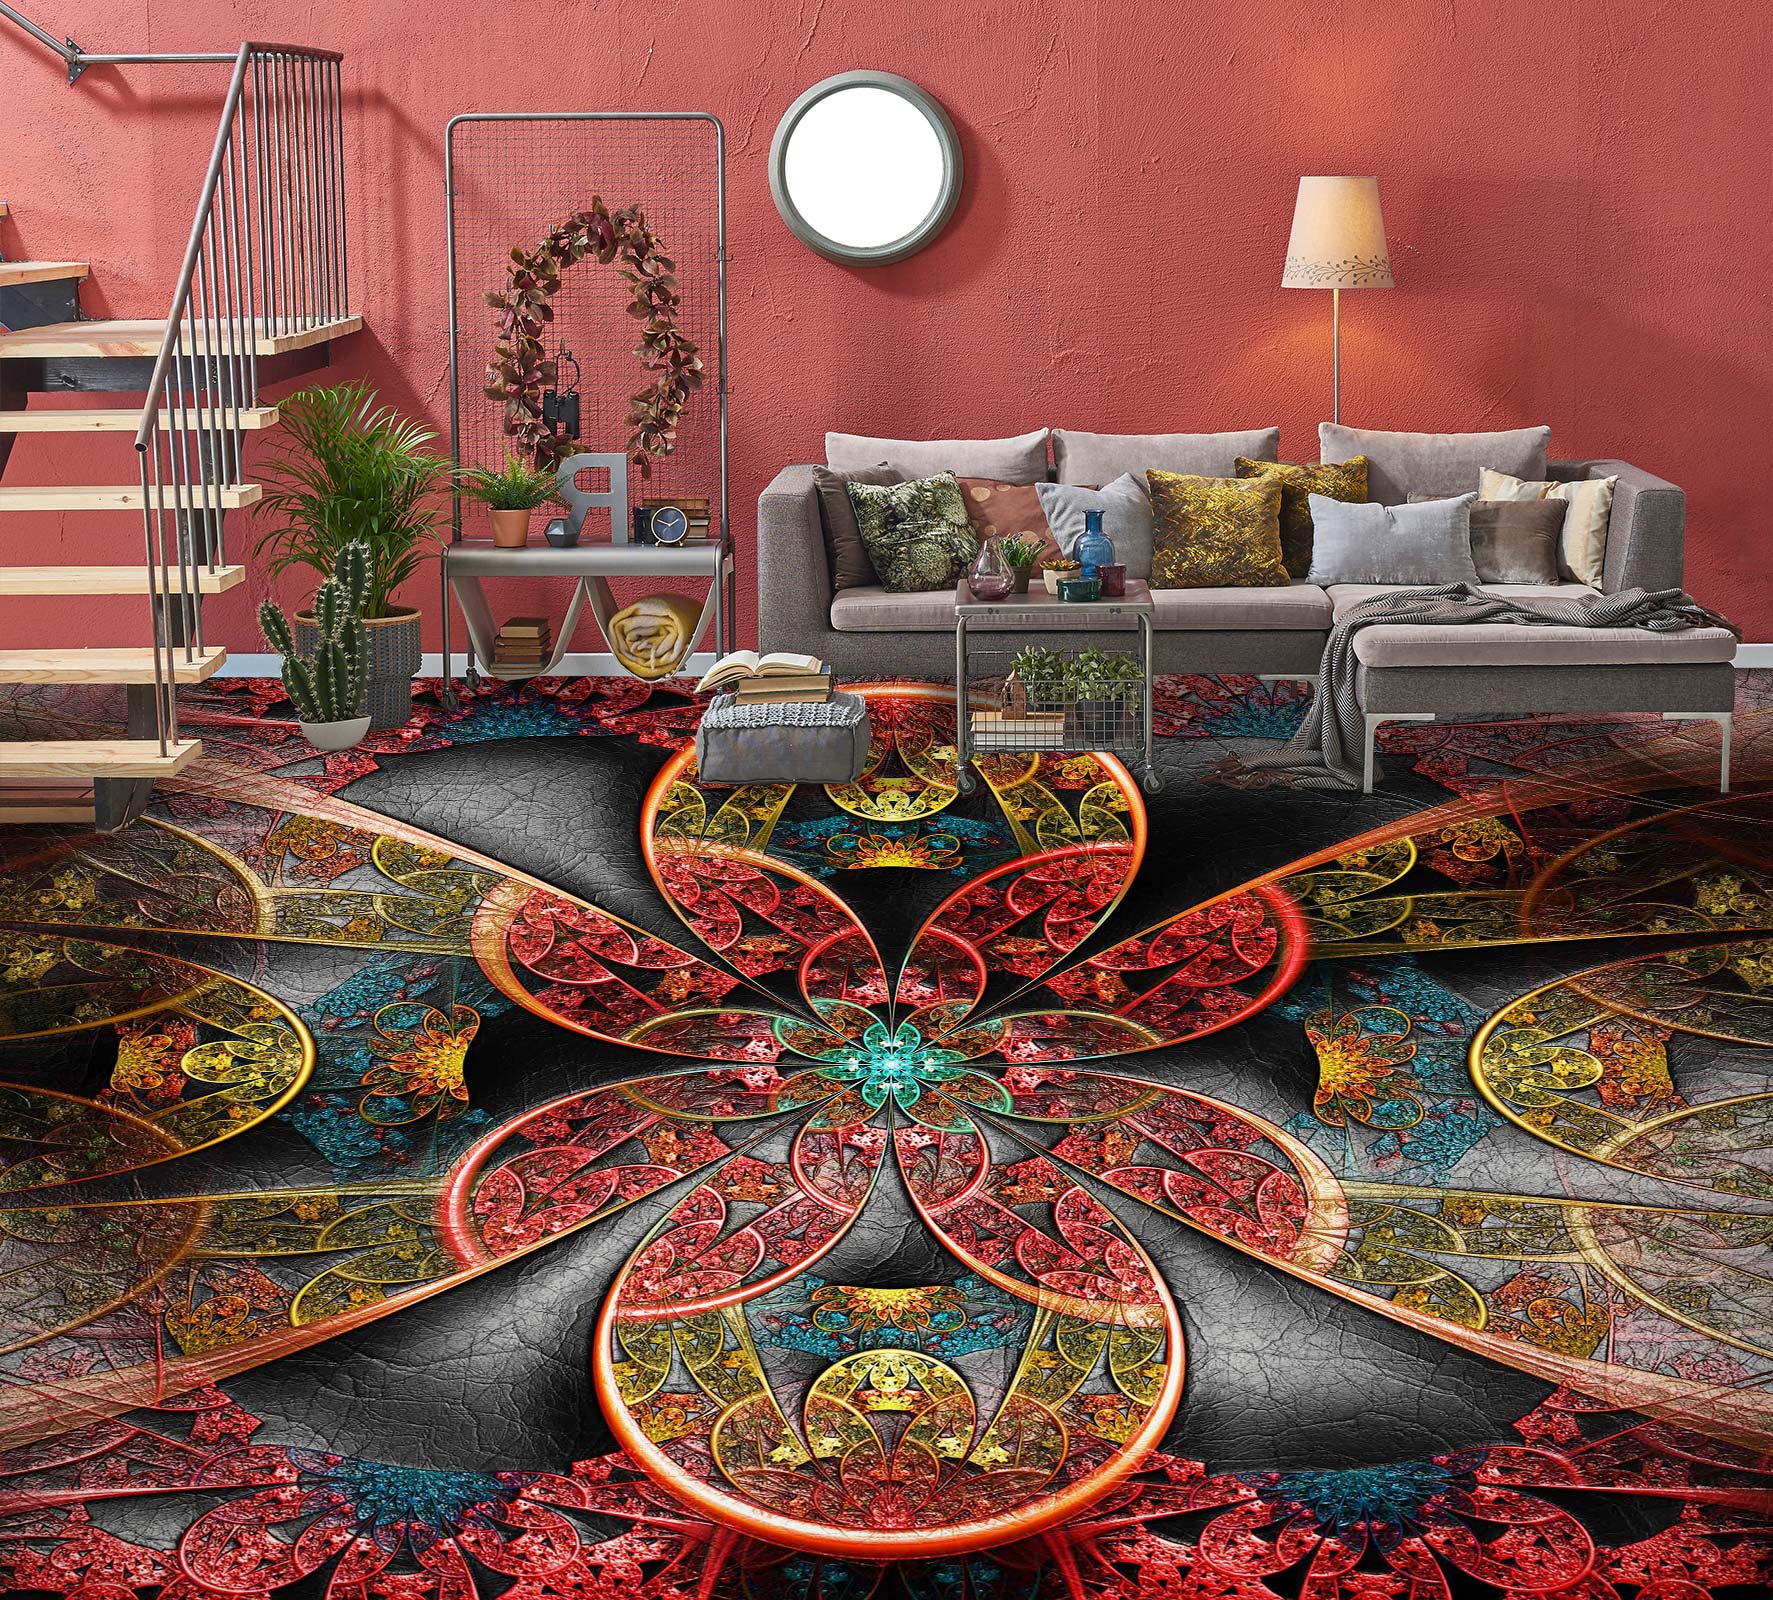 3D Psychedelic Red Flowers 1310 Floor Mural  Wallpaper Murals Self-Adhesive Removable Print Epoxy